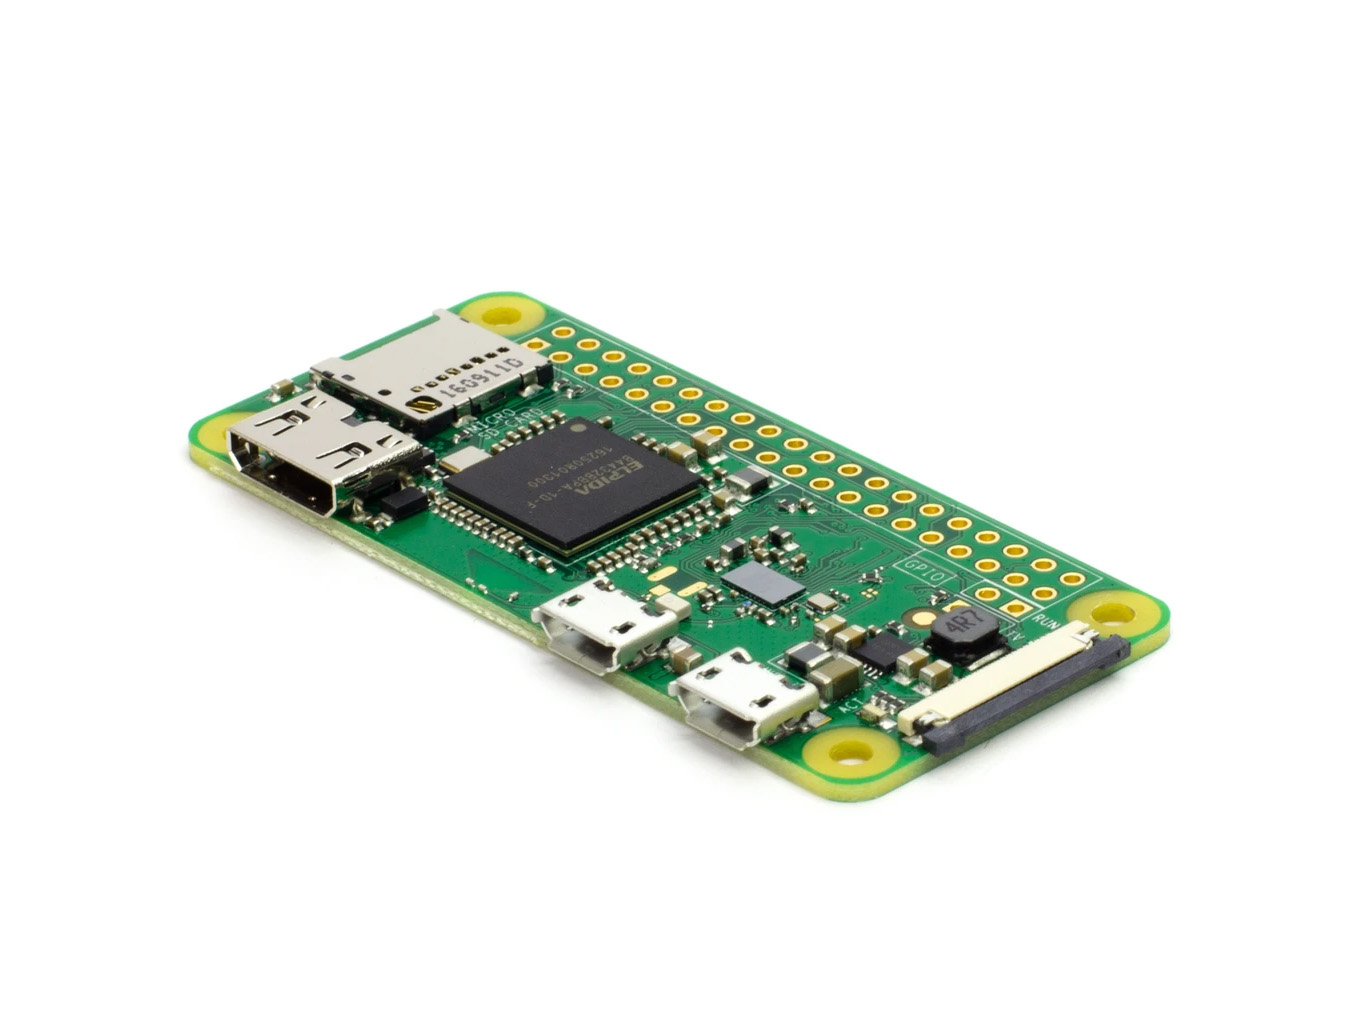 Gumstix RPi Zero Battery board - rechargeable and wireless